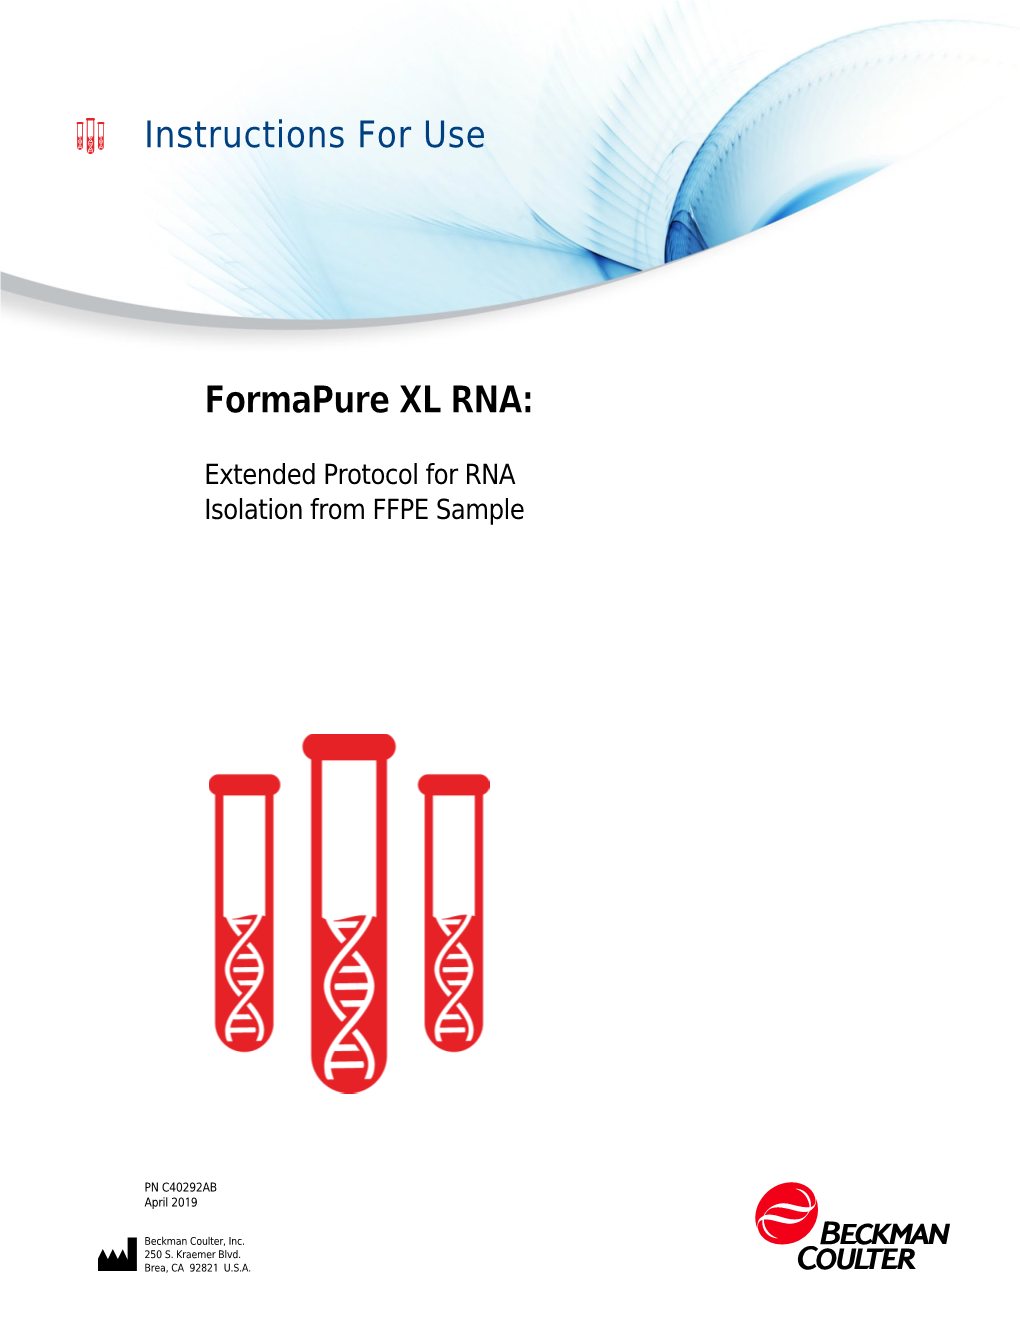 Instructions for Use Formapure XL RNA